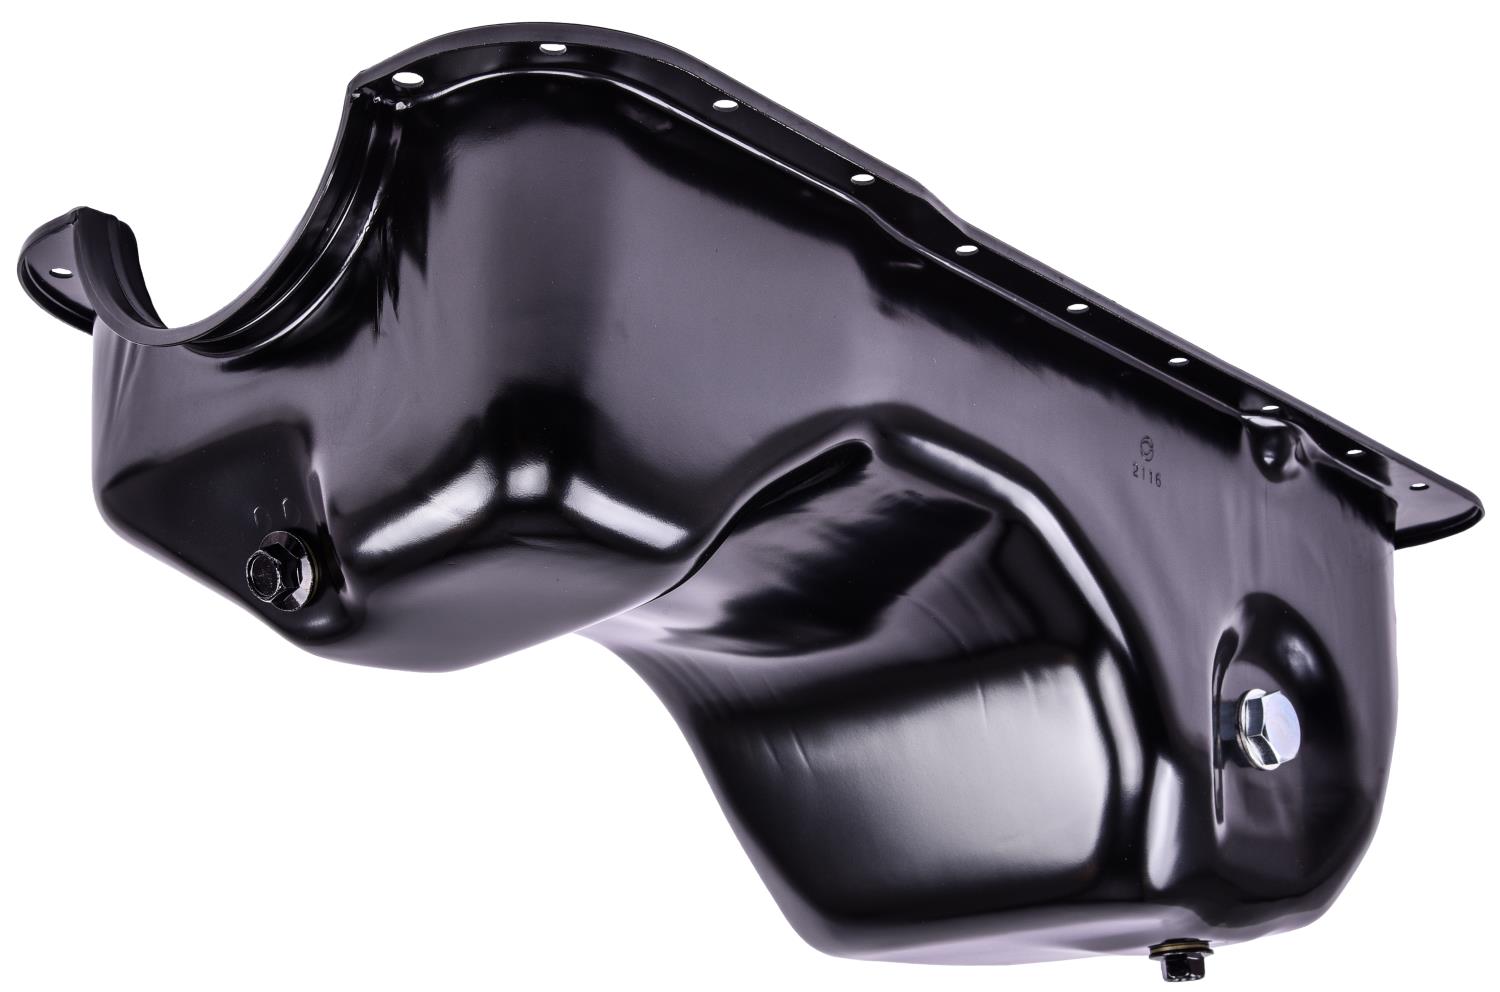 Stock-Style Replacement Oil Pan for 1979-1995 Ford Mustang 5.0L w/Low Oil Level Sensor Port [Black]